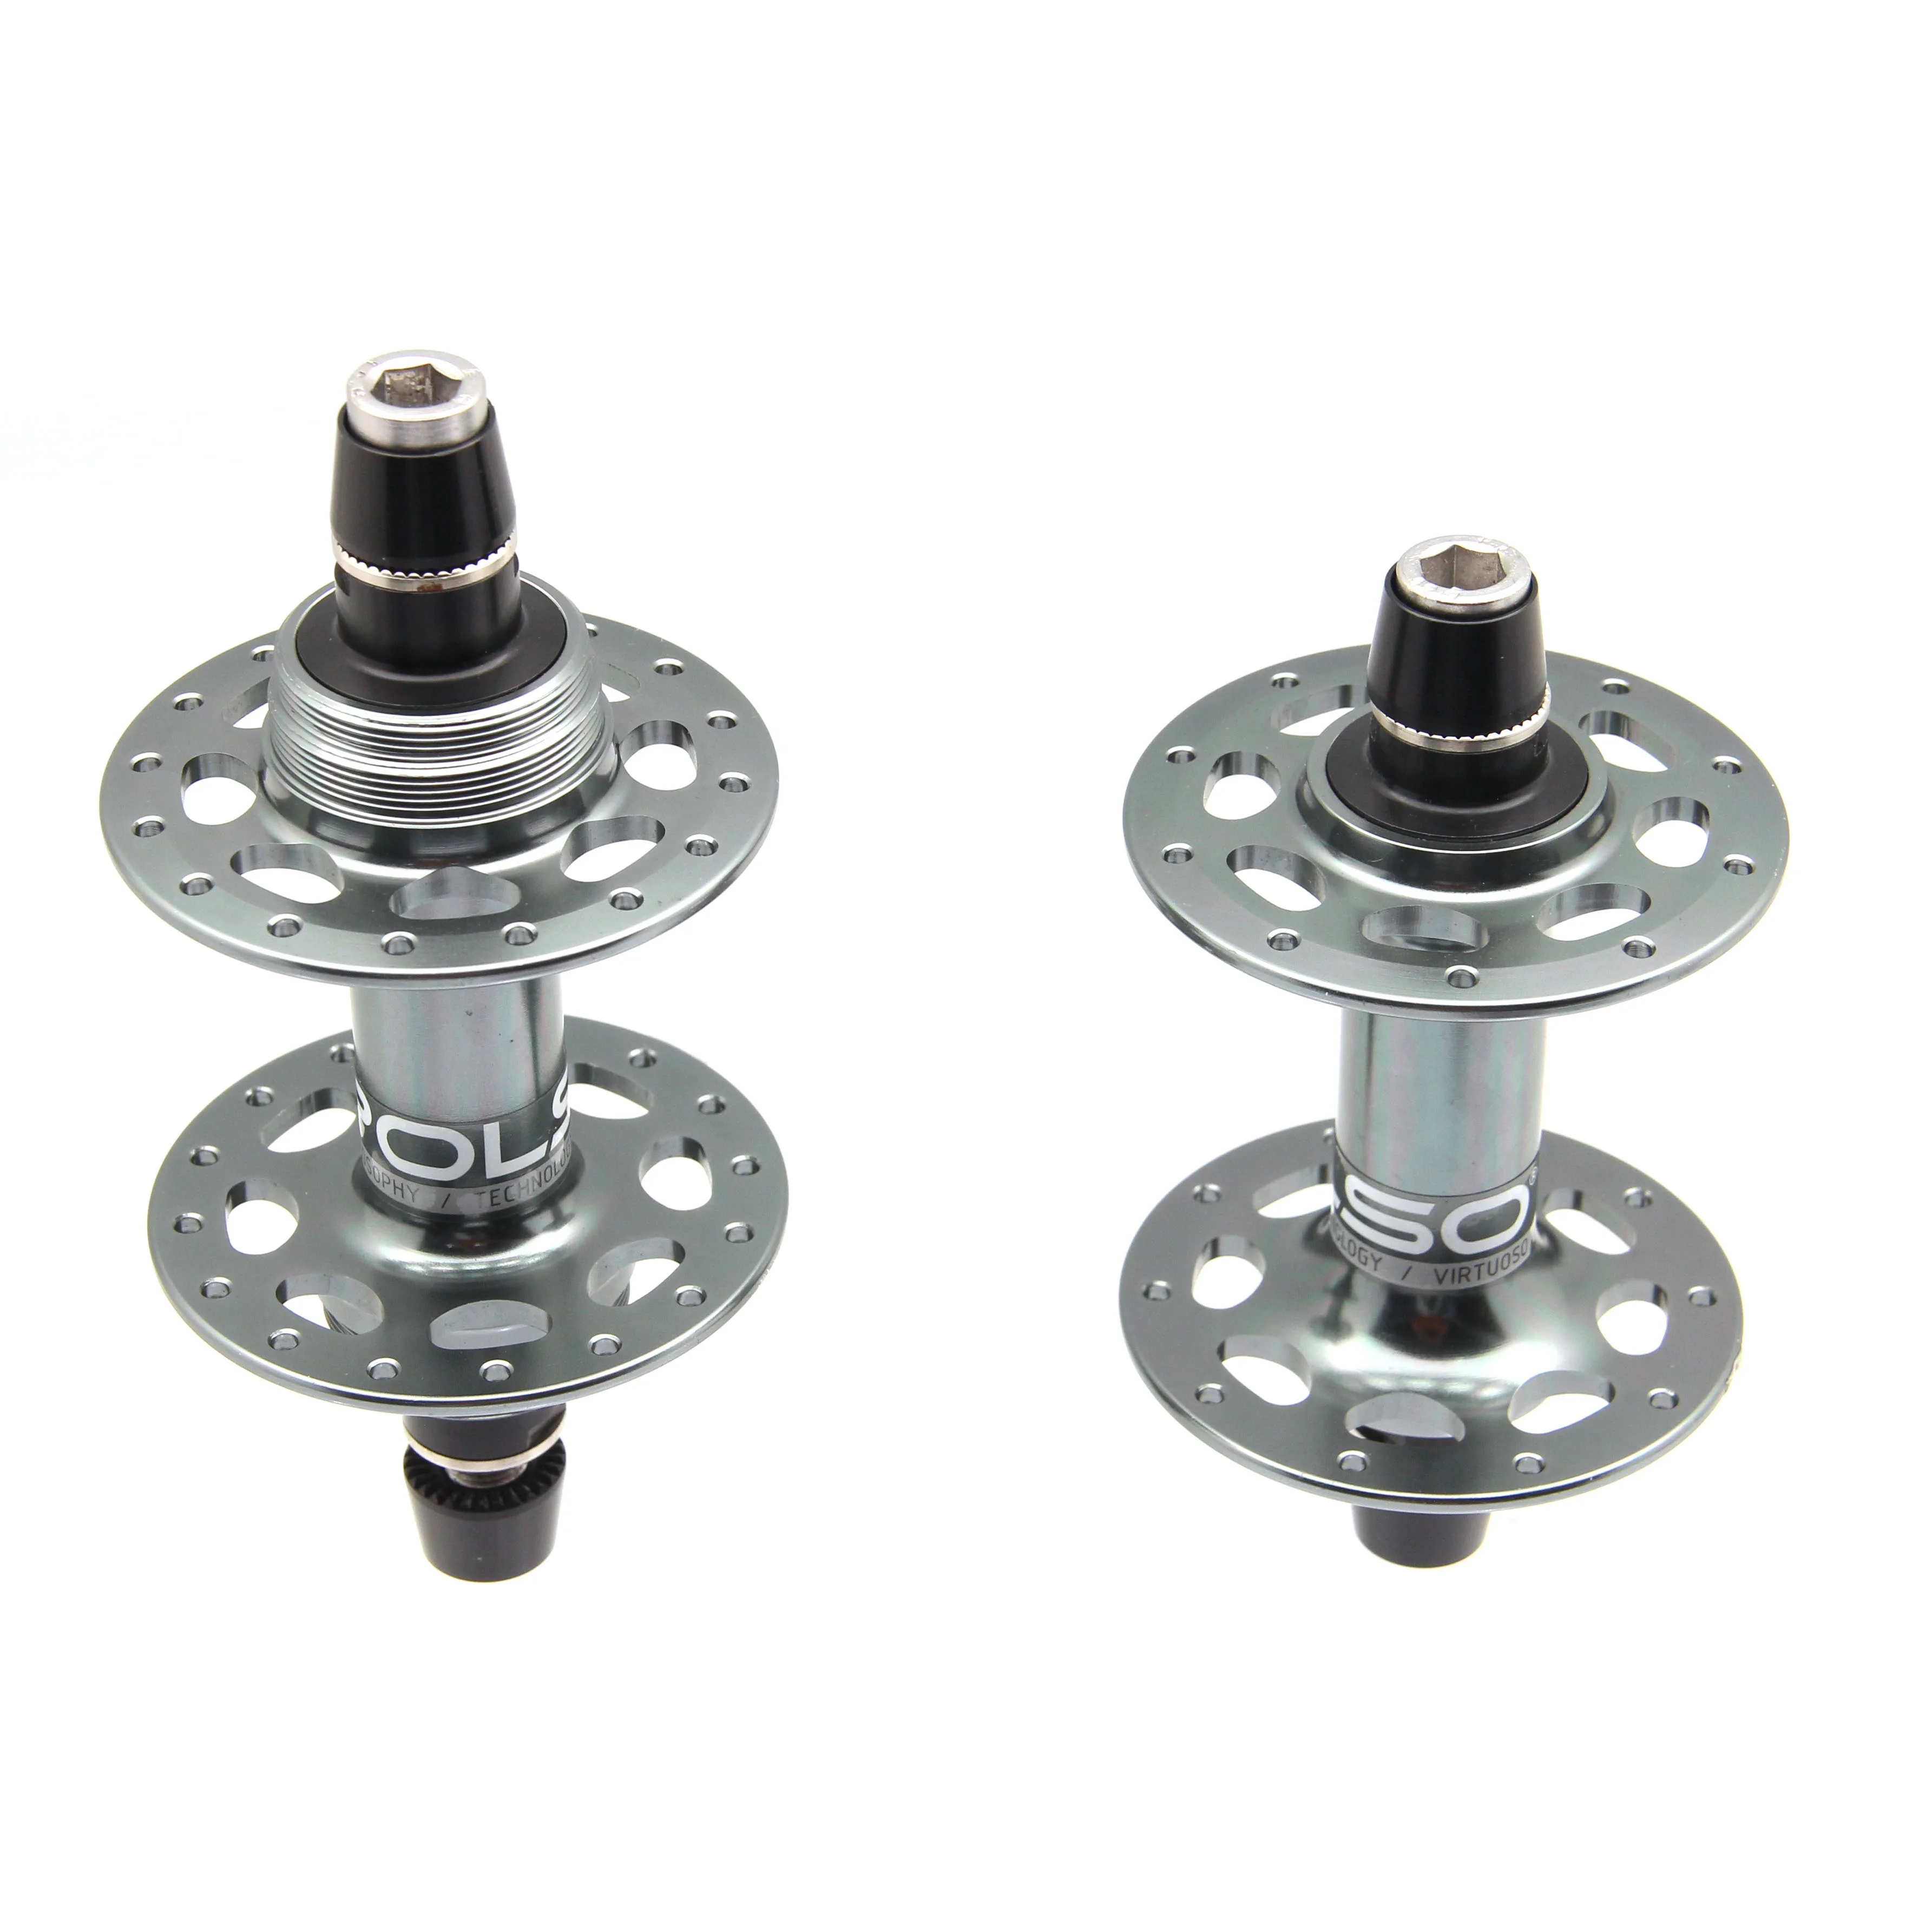 bicycle parts HUB 218F/R Bicycle 36 Hole Sealed Bearing Rear Hub for Fixed Bike (1600327409421)